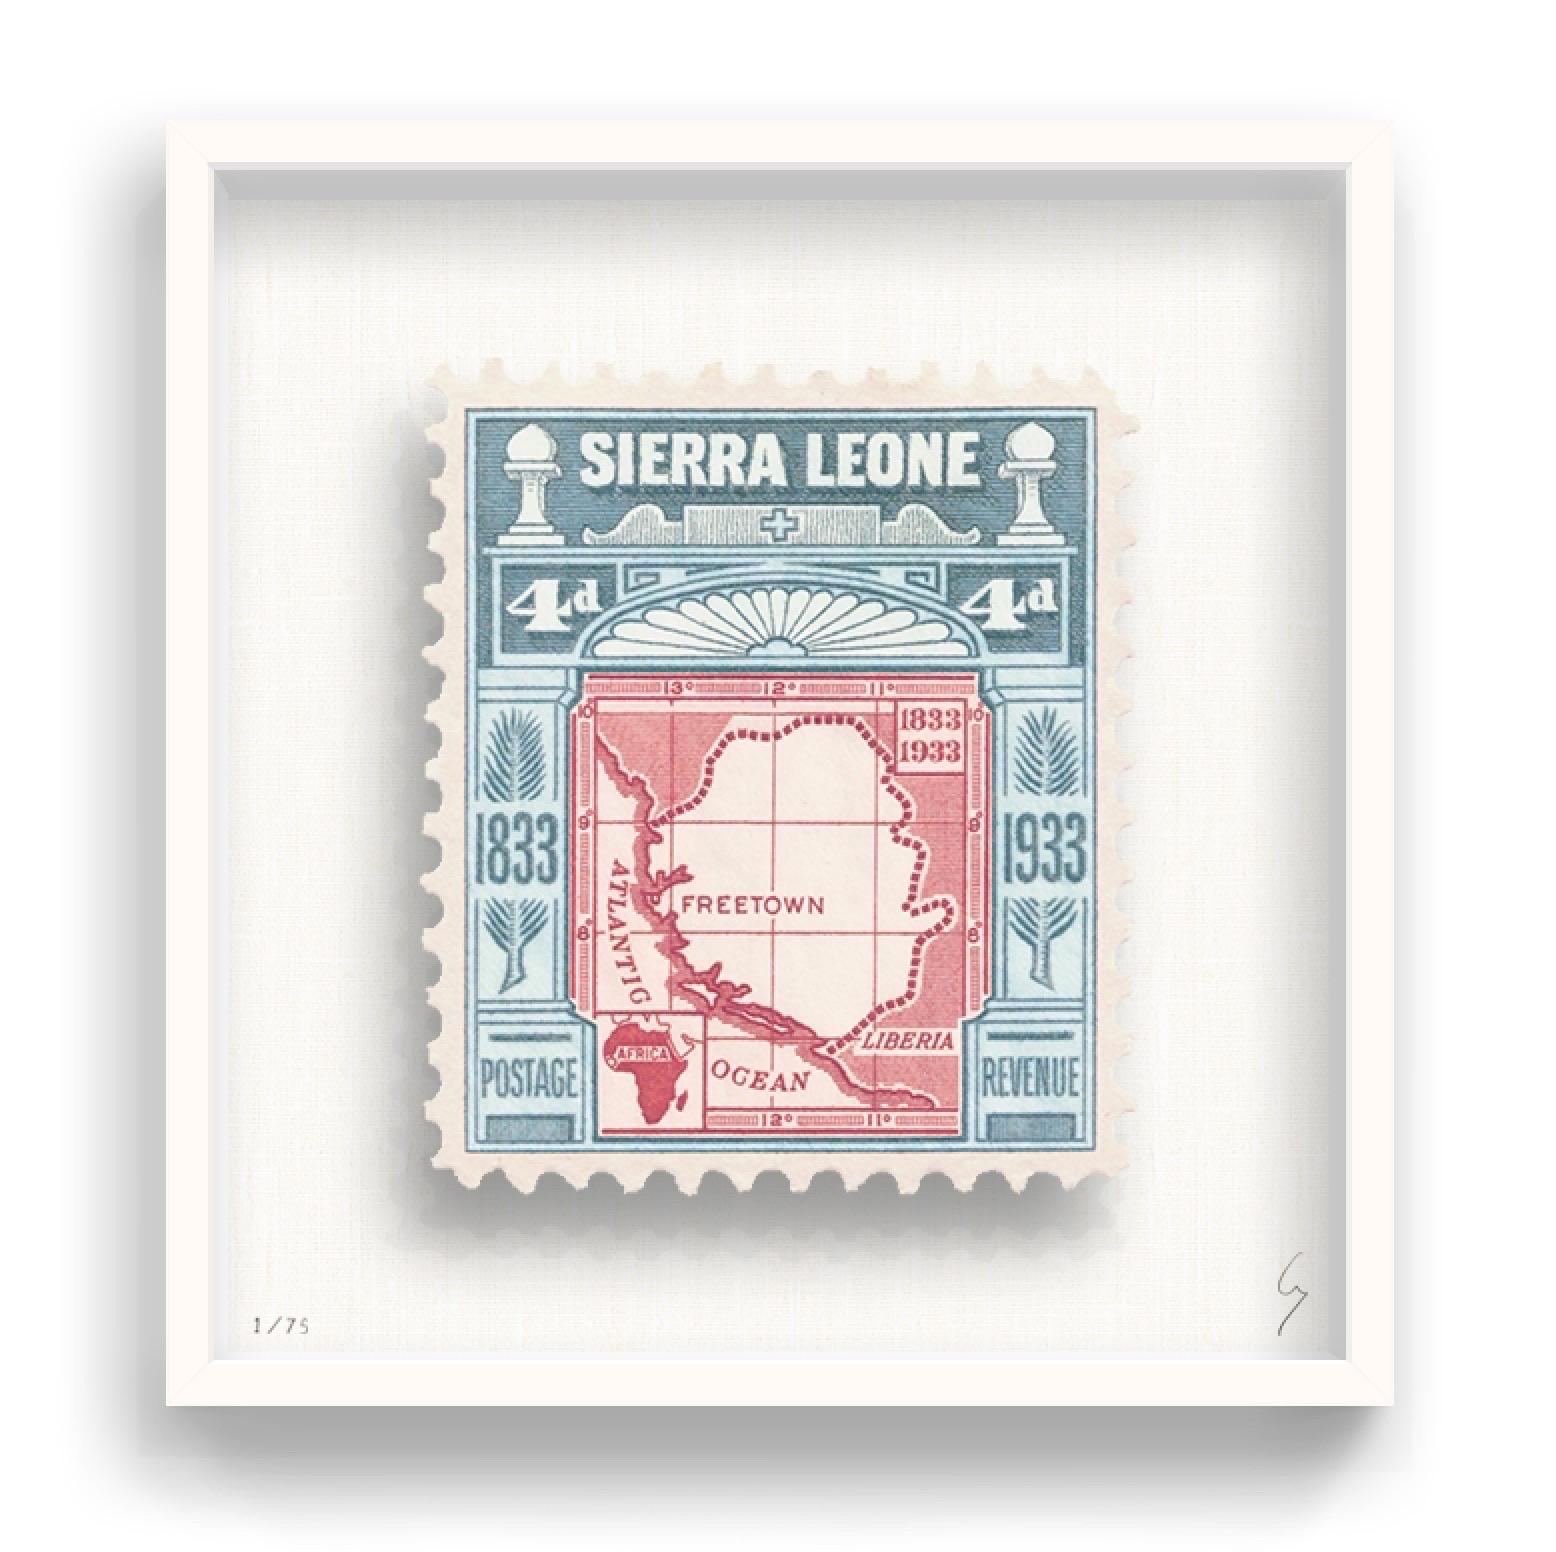 Guy Gee, Sierra Leon (medium)

Hand-engraved print on 350gsm on G.F Smith card
31 x 35 cm (12 1/5 x 13 4/5)
Frame included 
Edition of 75 

Each artwork by Guy had been digitally reimagined from an original postage stamp. Cut out and finished by